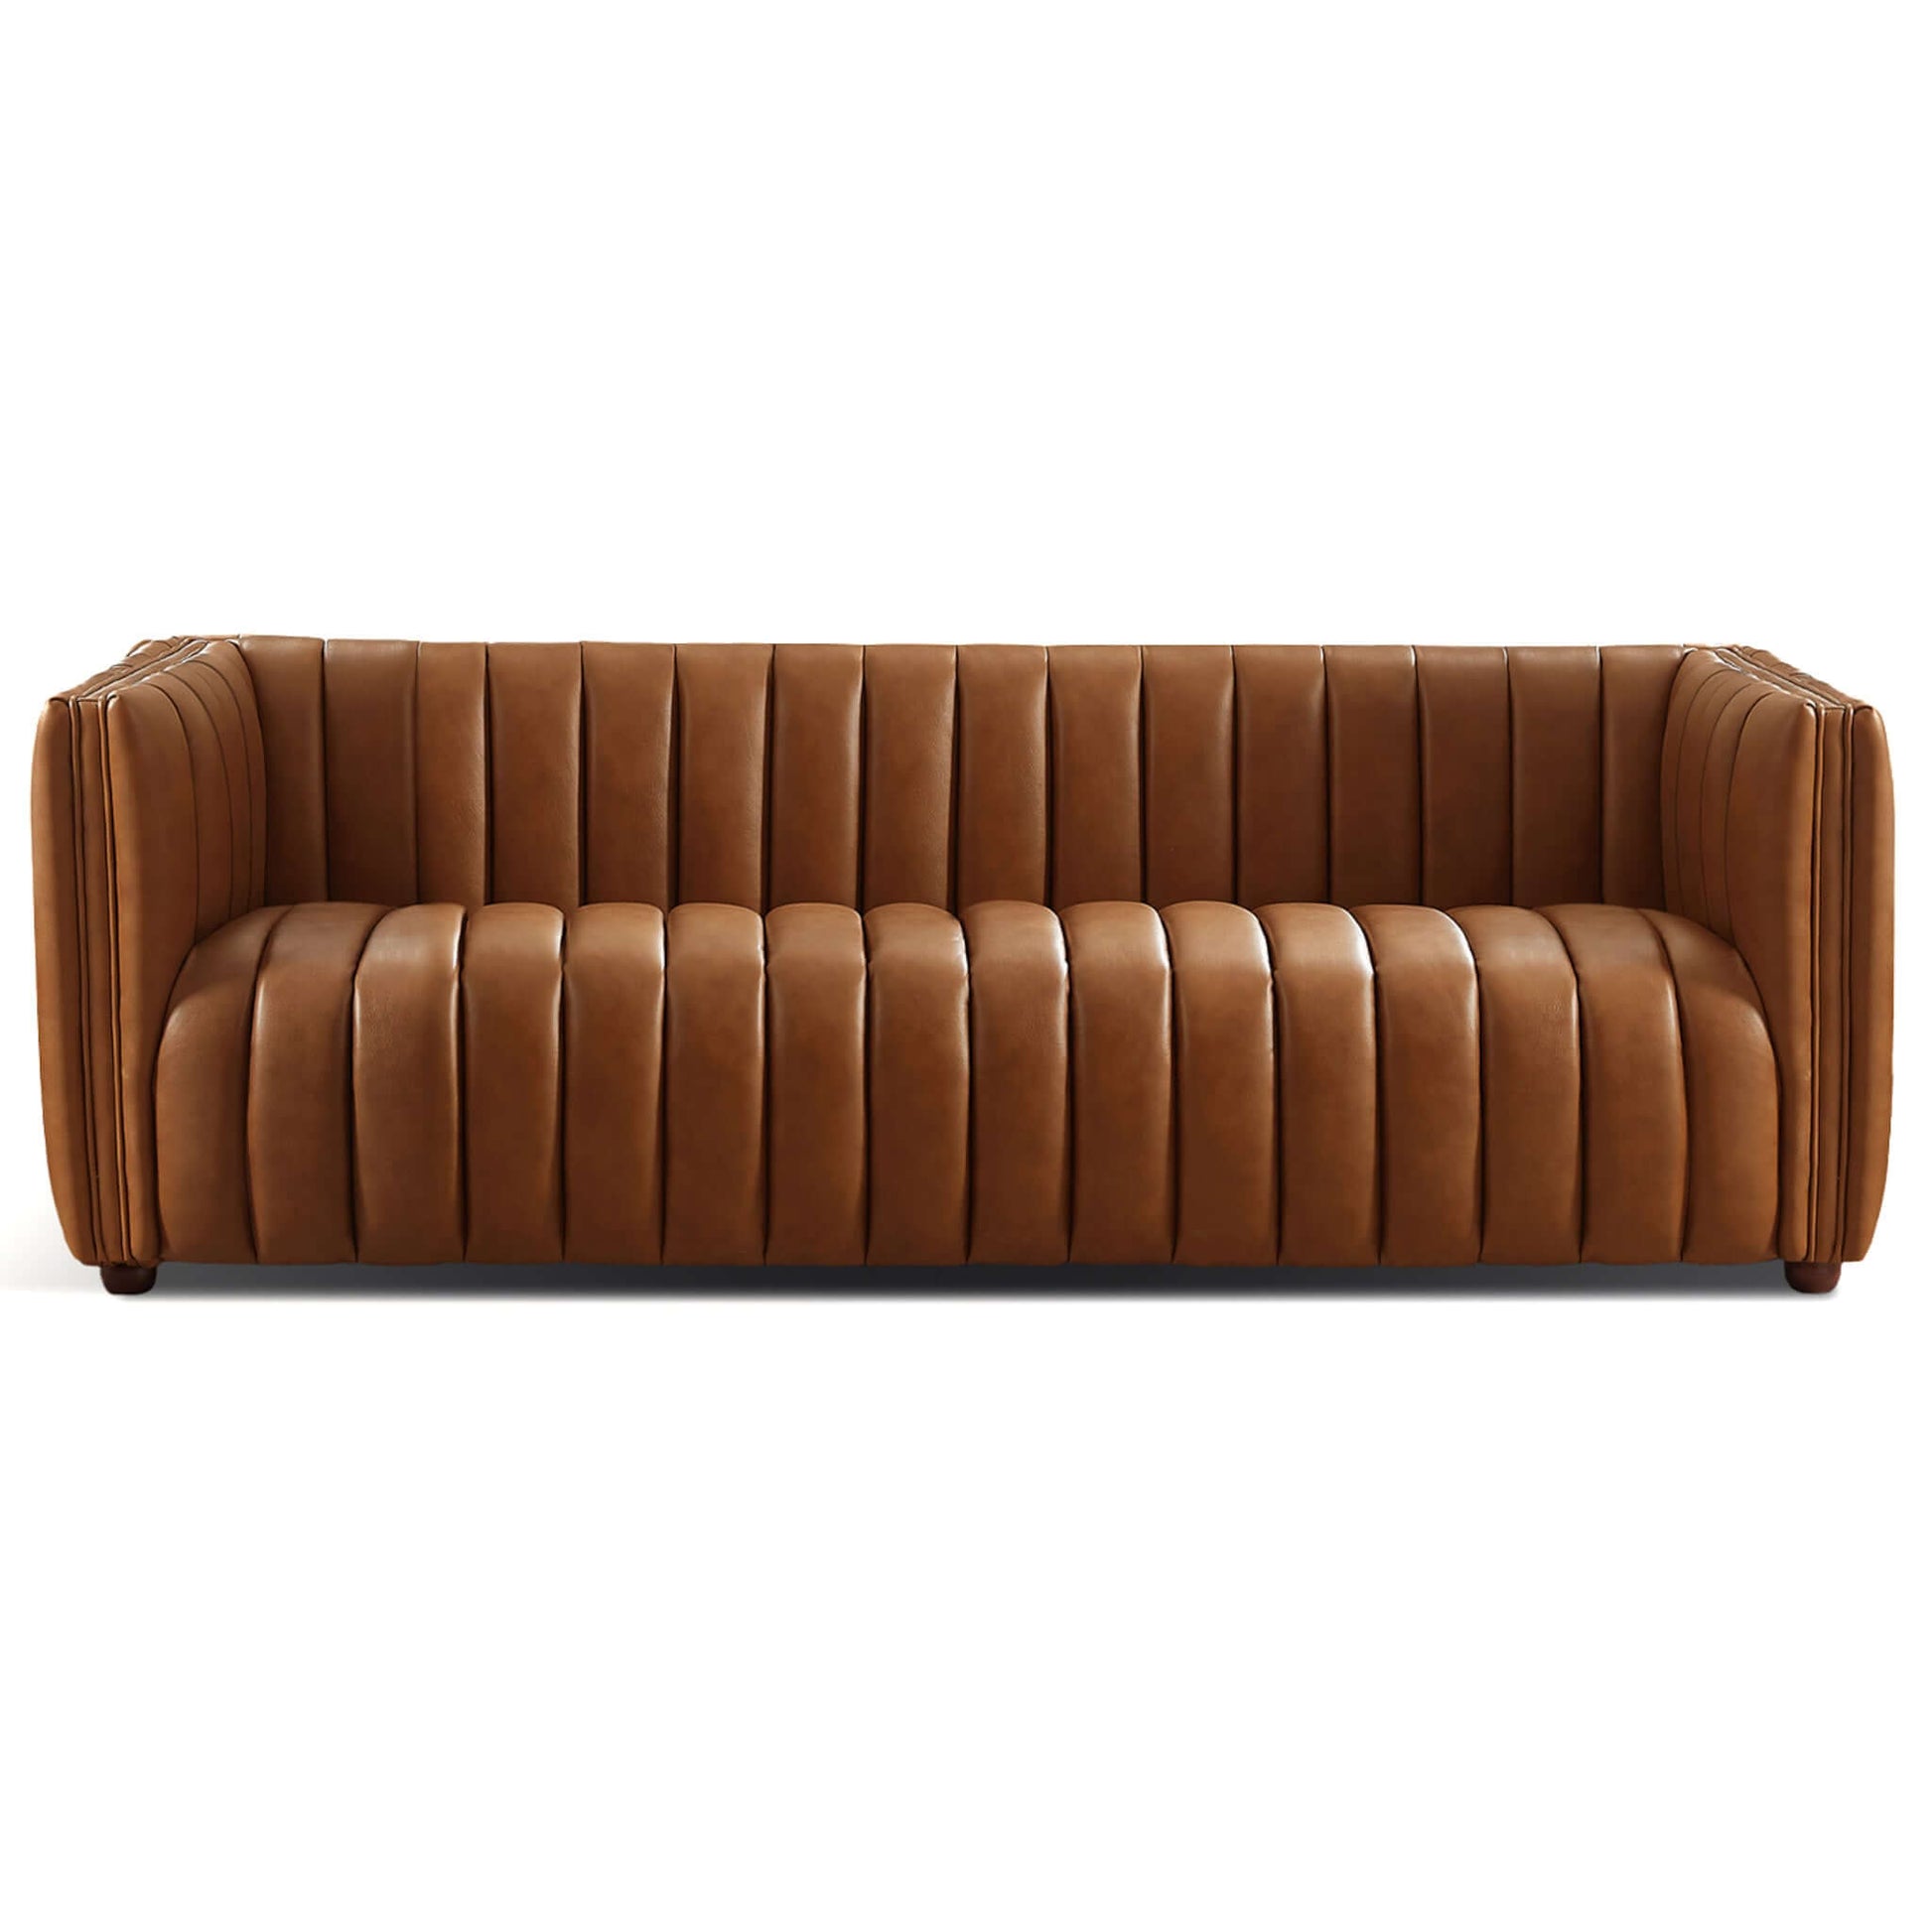 Close up view of  Tan Leather Couch